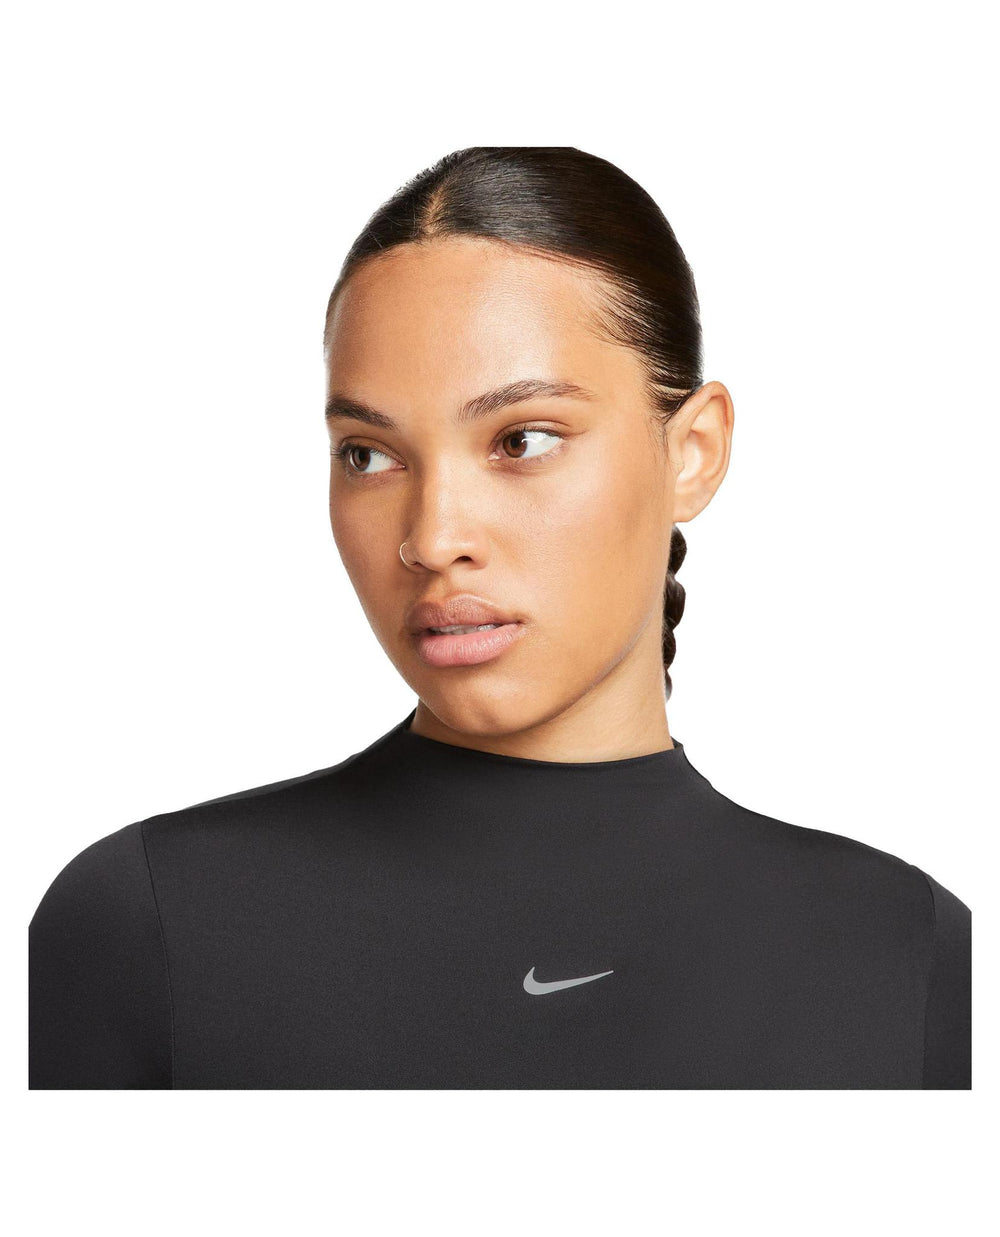 Nike Dri FIT One Luxe Women's Long Sleeve Cropped Top   STASHED